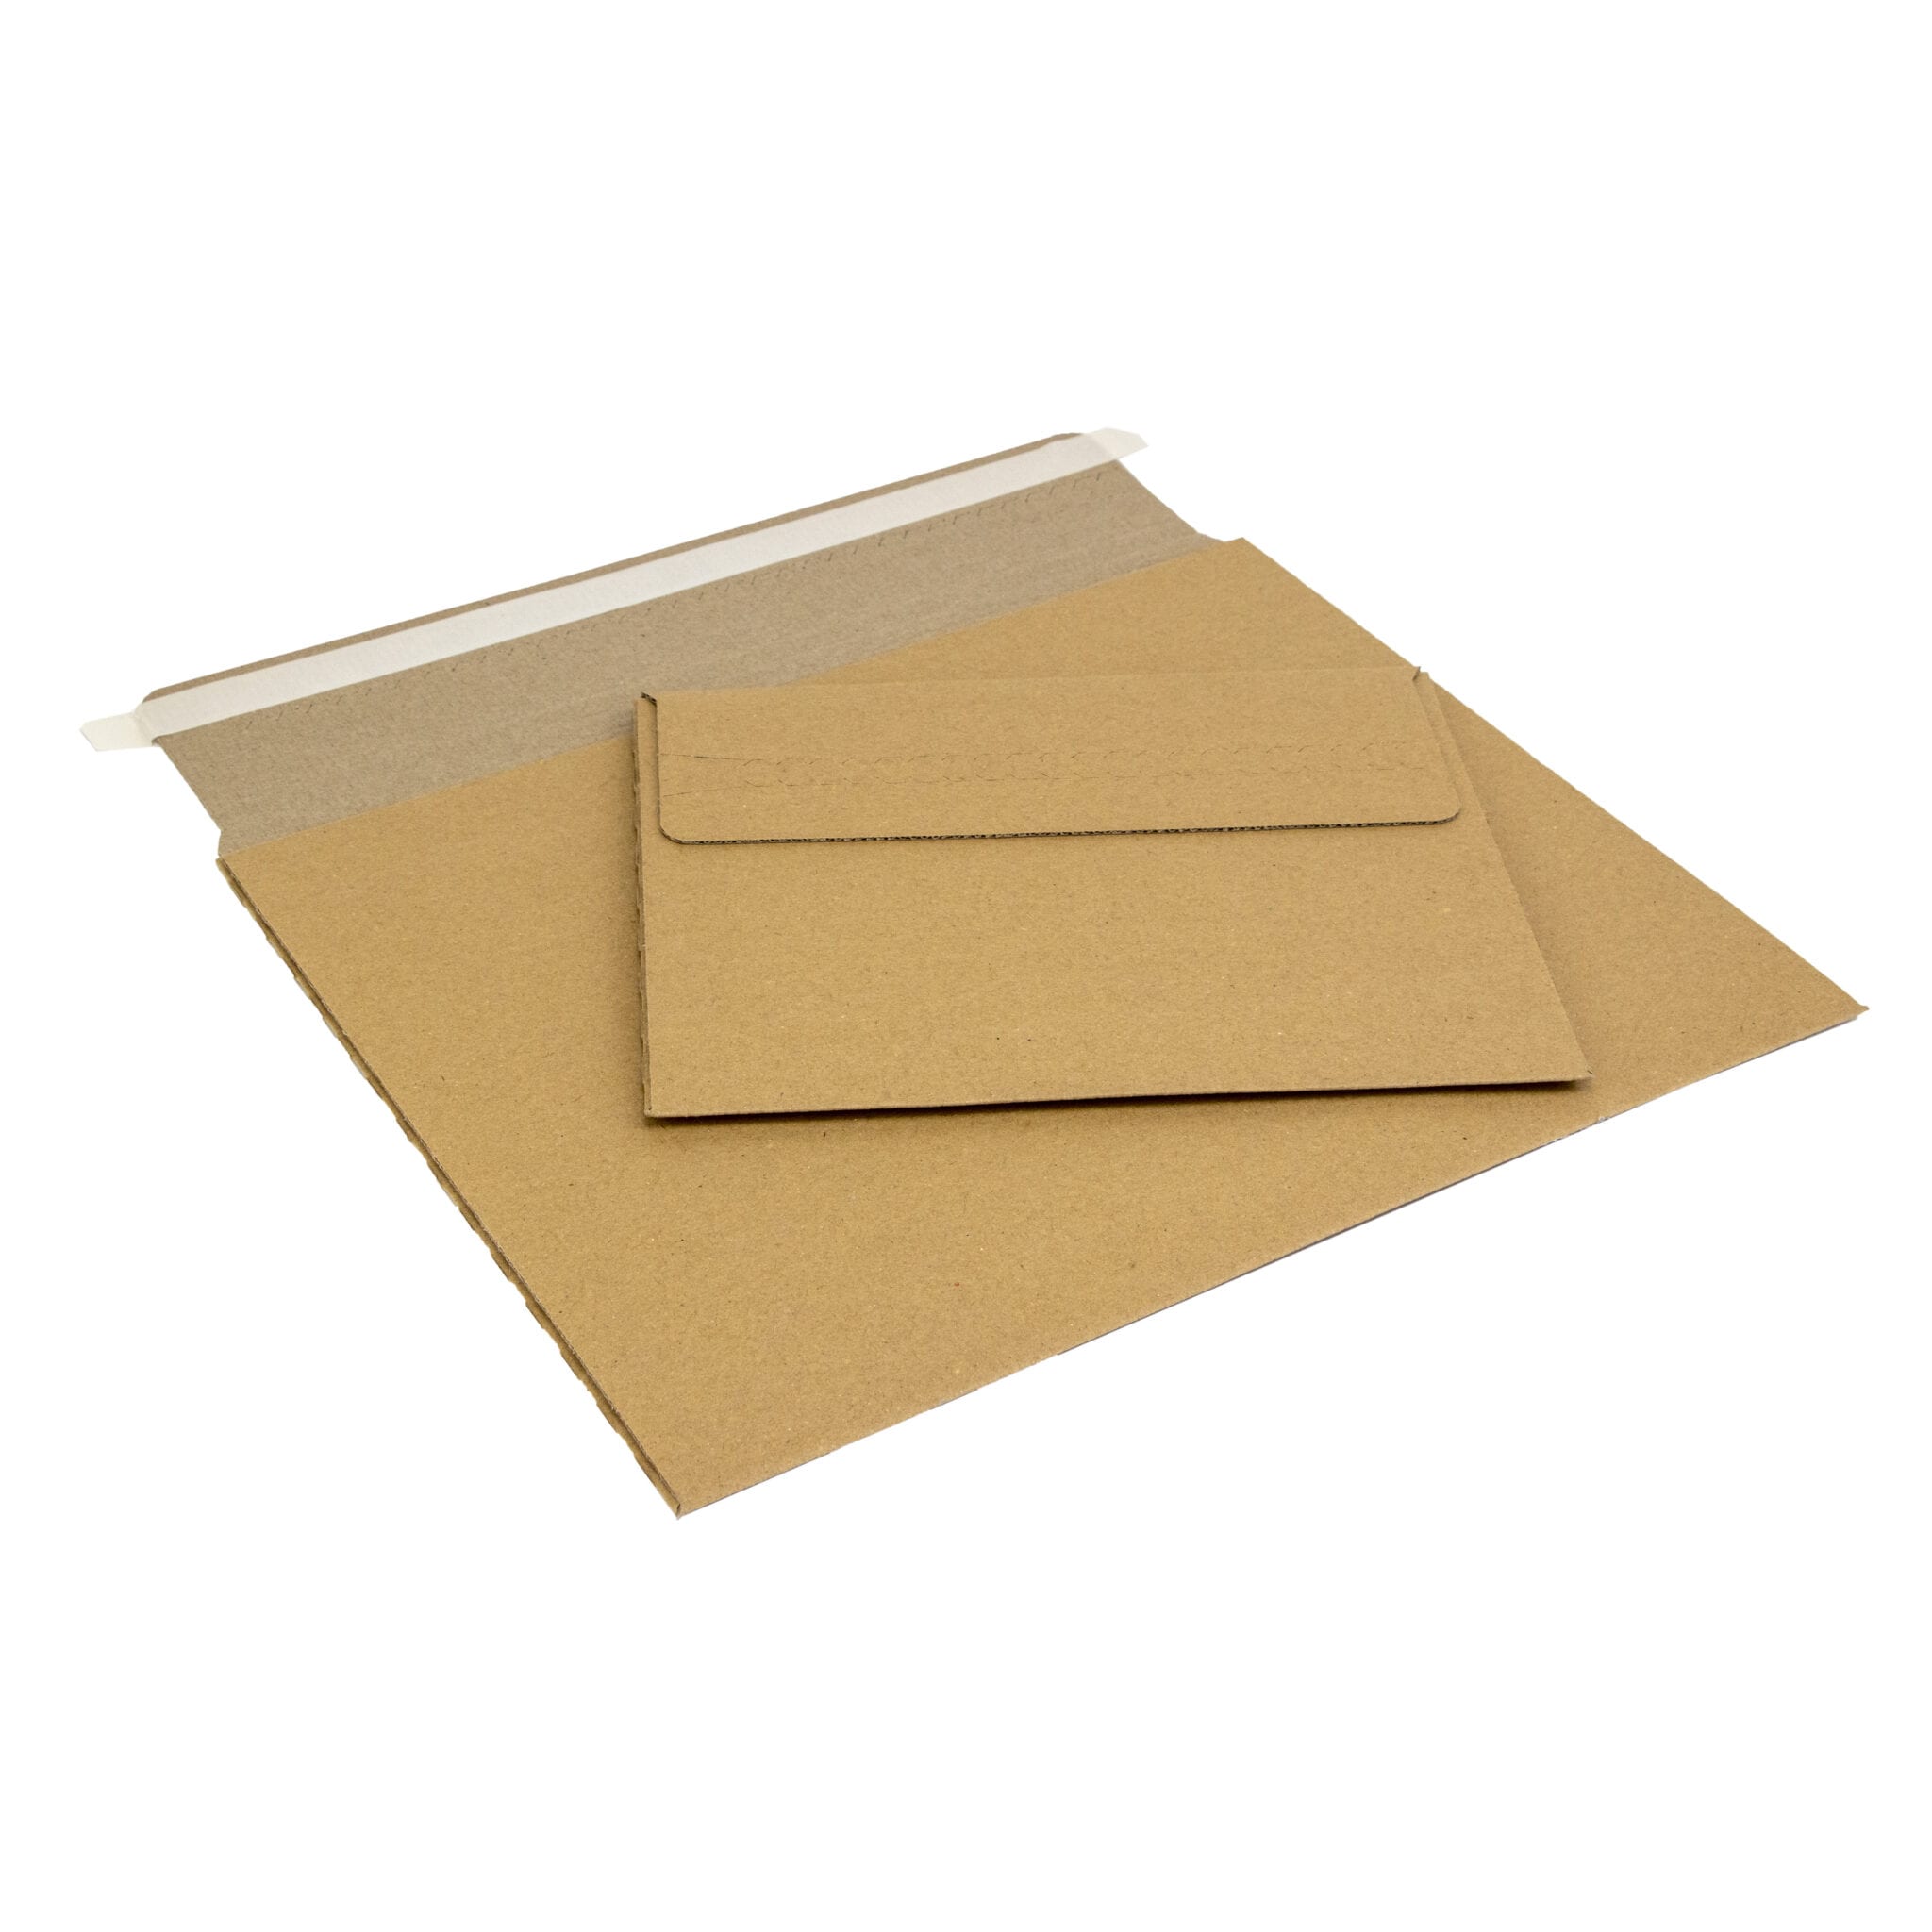 Packaging Supplies, Design and Printing | UK Supplier